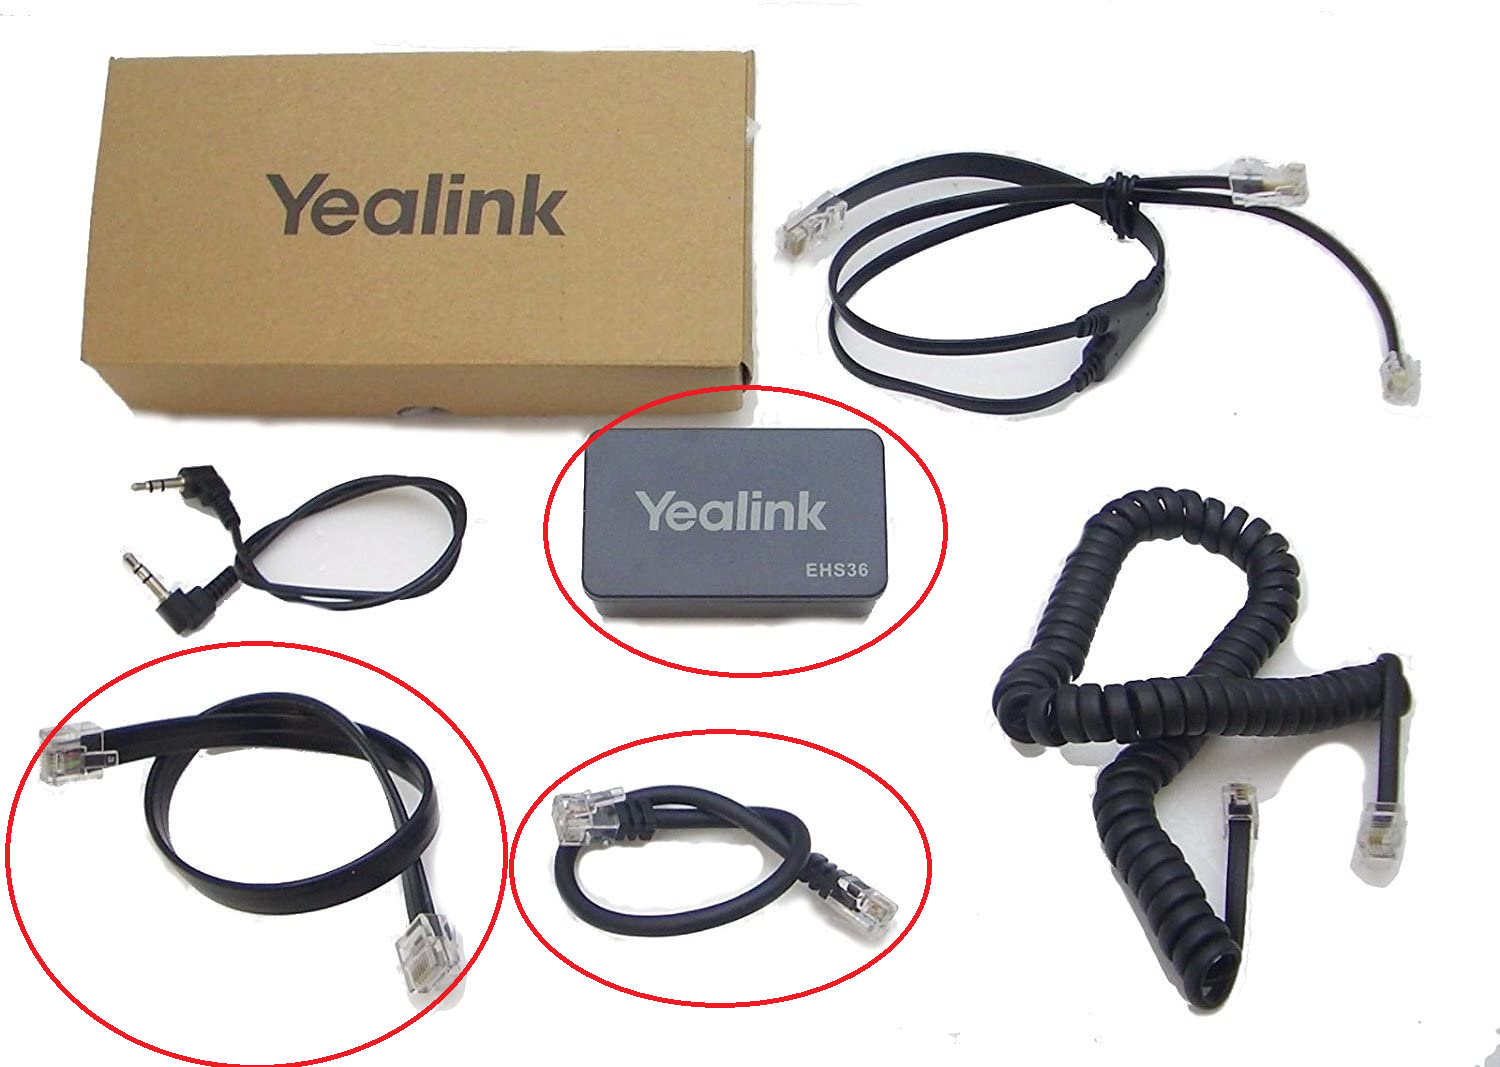 Yealink EHS36 cords and adapter box for Leitner